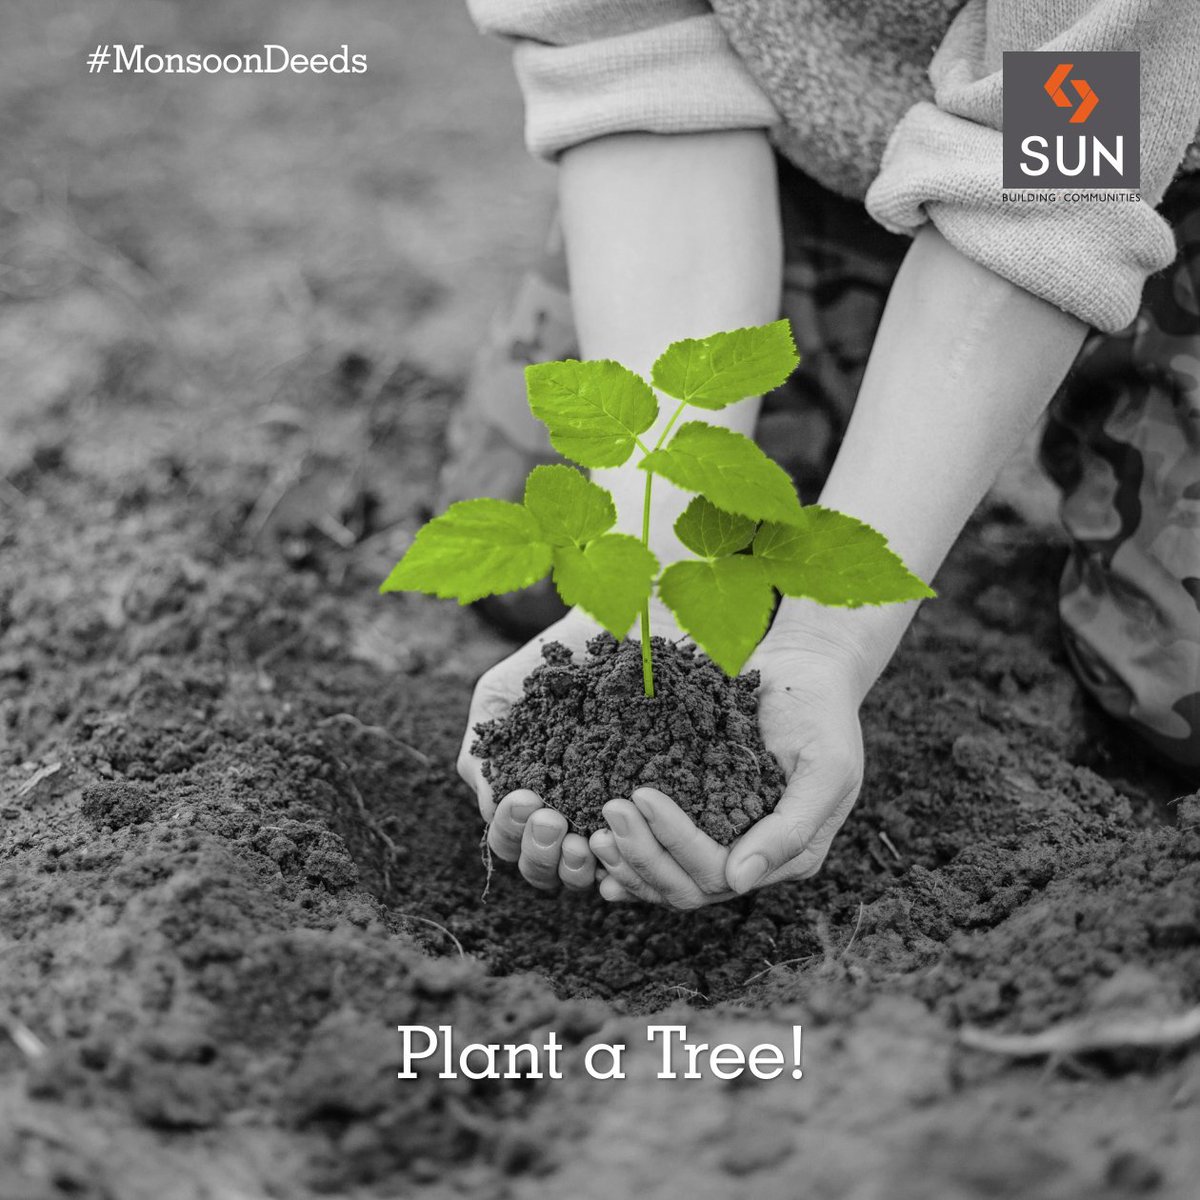 #MonsoonDeeds
This monsoon, let's take an initiative to #planttrees and nurture it for a bright future. https://t.co/jGHLcb0omi